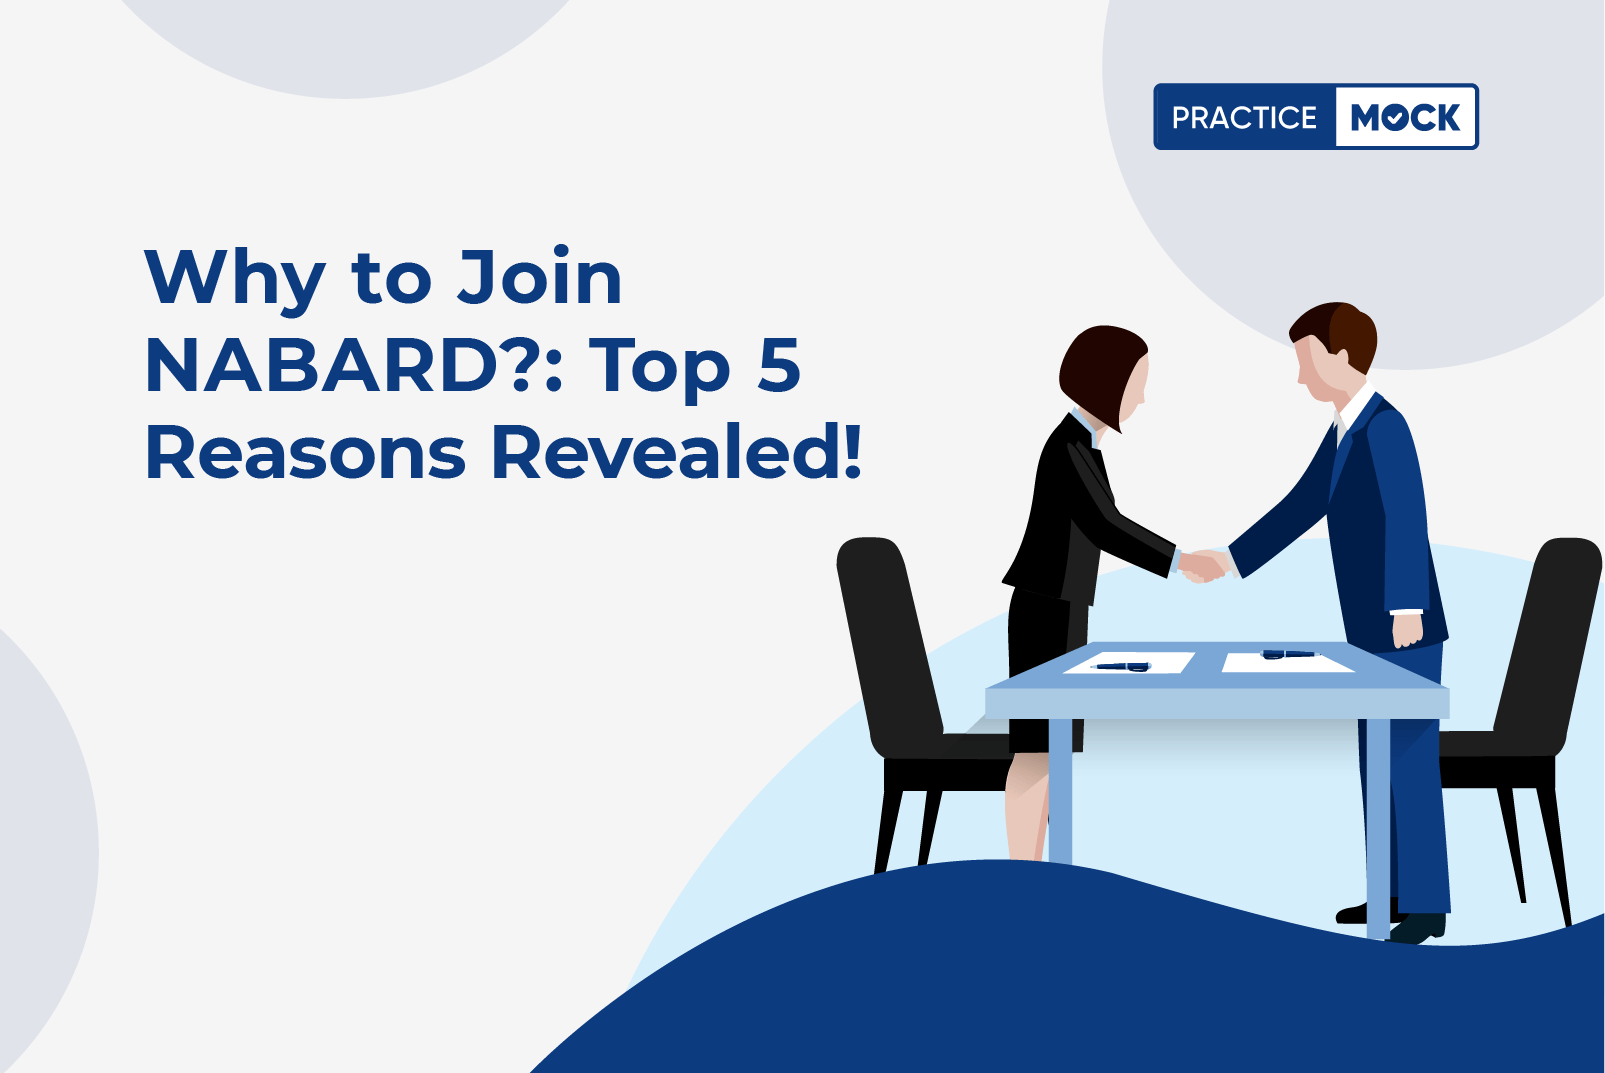 Why to Join NABARD Top 5 Reasons Revealed!